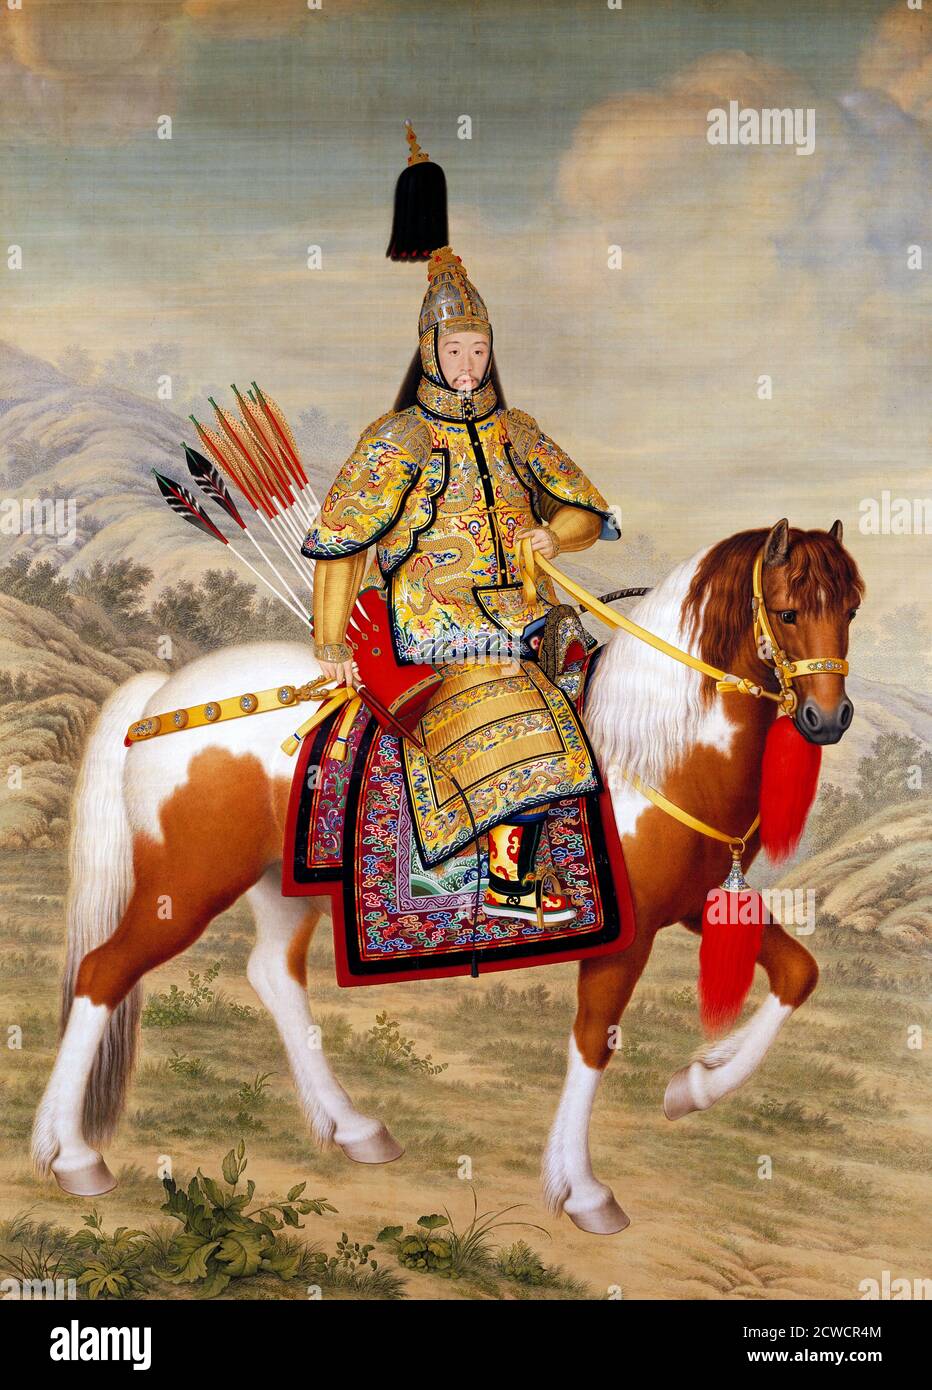 The Qianlong Emperor in Ceremonial Armor on Horseback by Giuseppe Castiglione (1688-1766, Chinese name Lang Shining),  ink and color on silk, 1758, The Qianlong Emperor (1711-1799) was the 6th Emperor of the Qing Dynasty in China Stock Photo